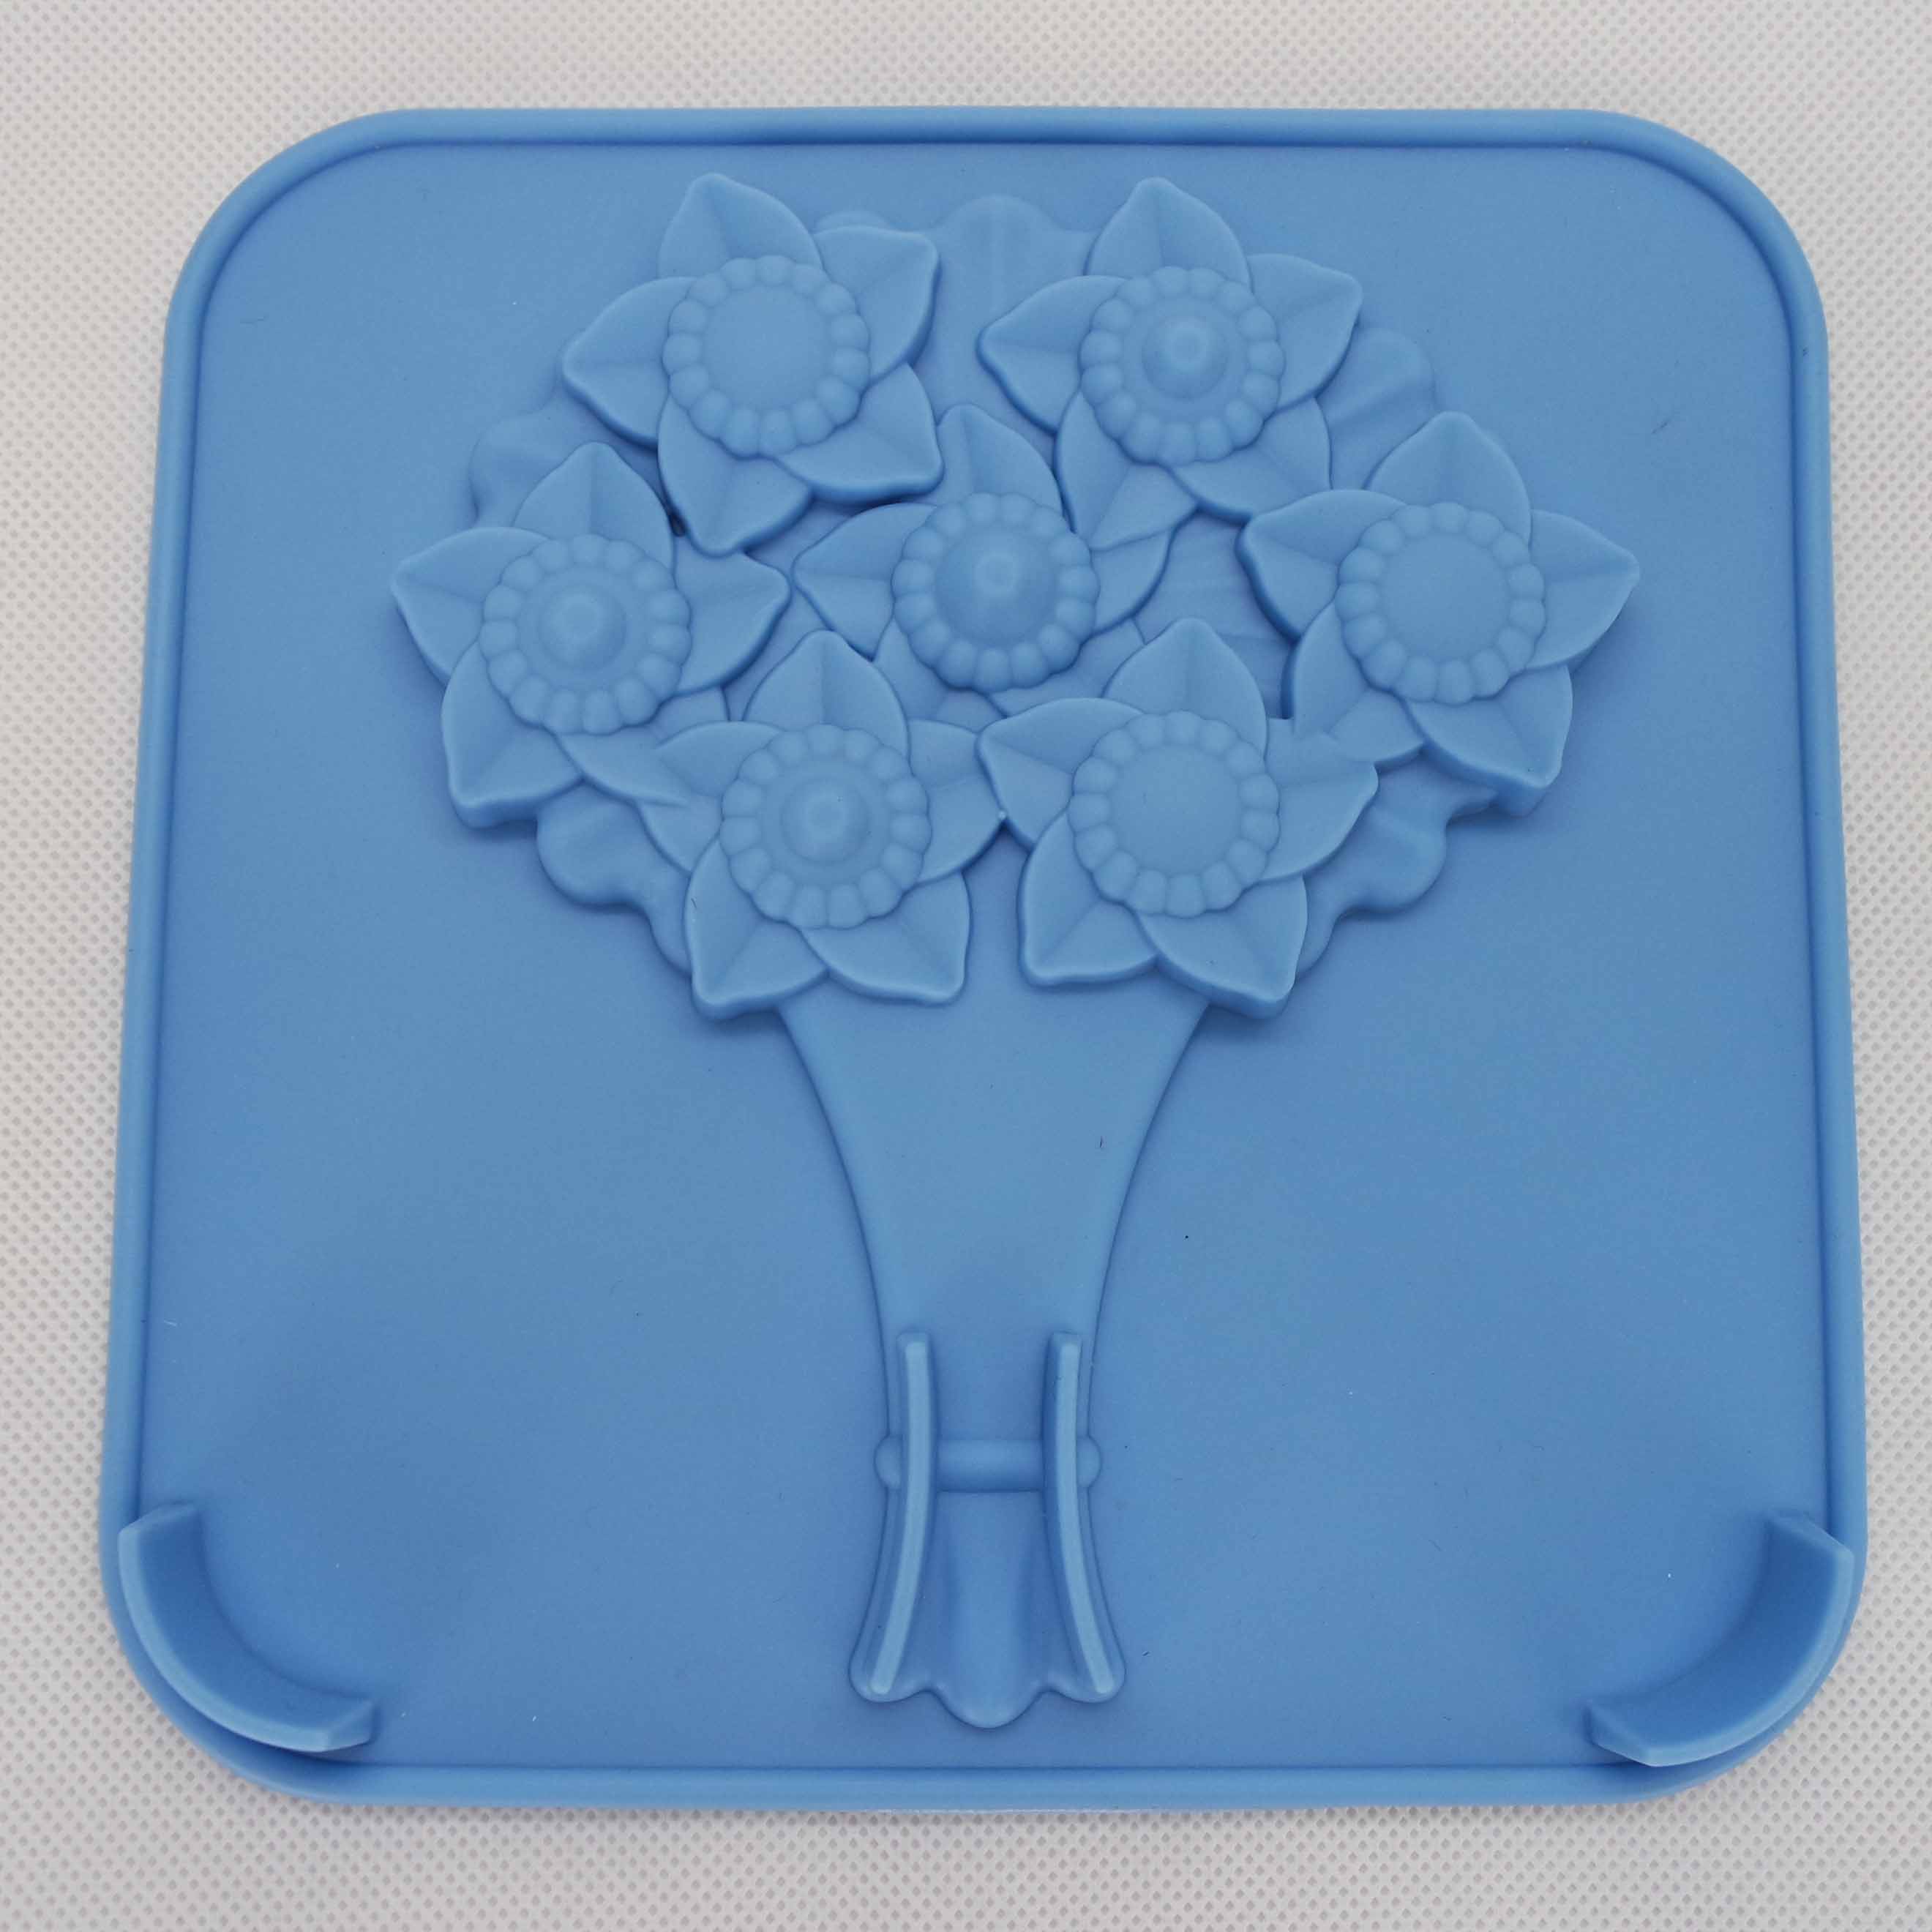 CXCH-029	Silicone chocoalte mould -Flower